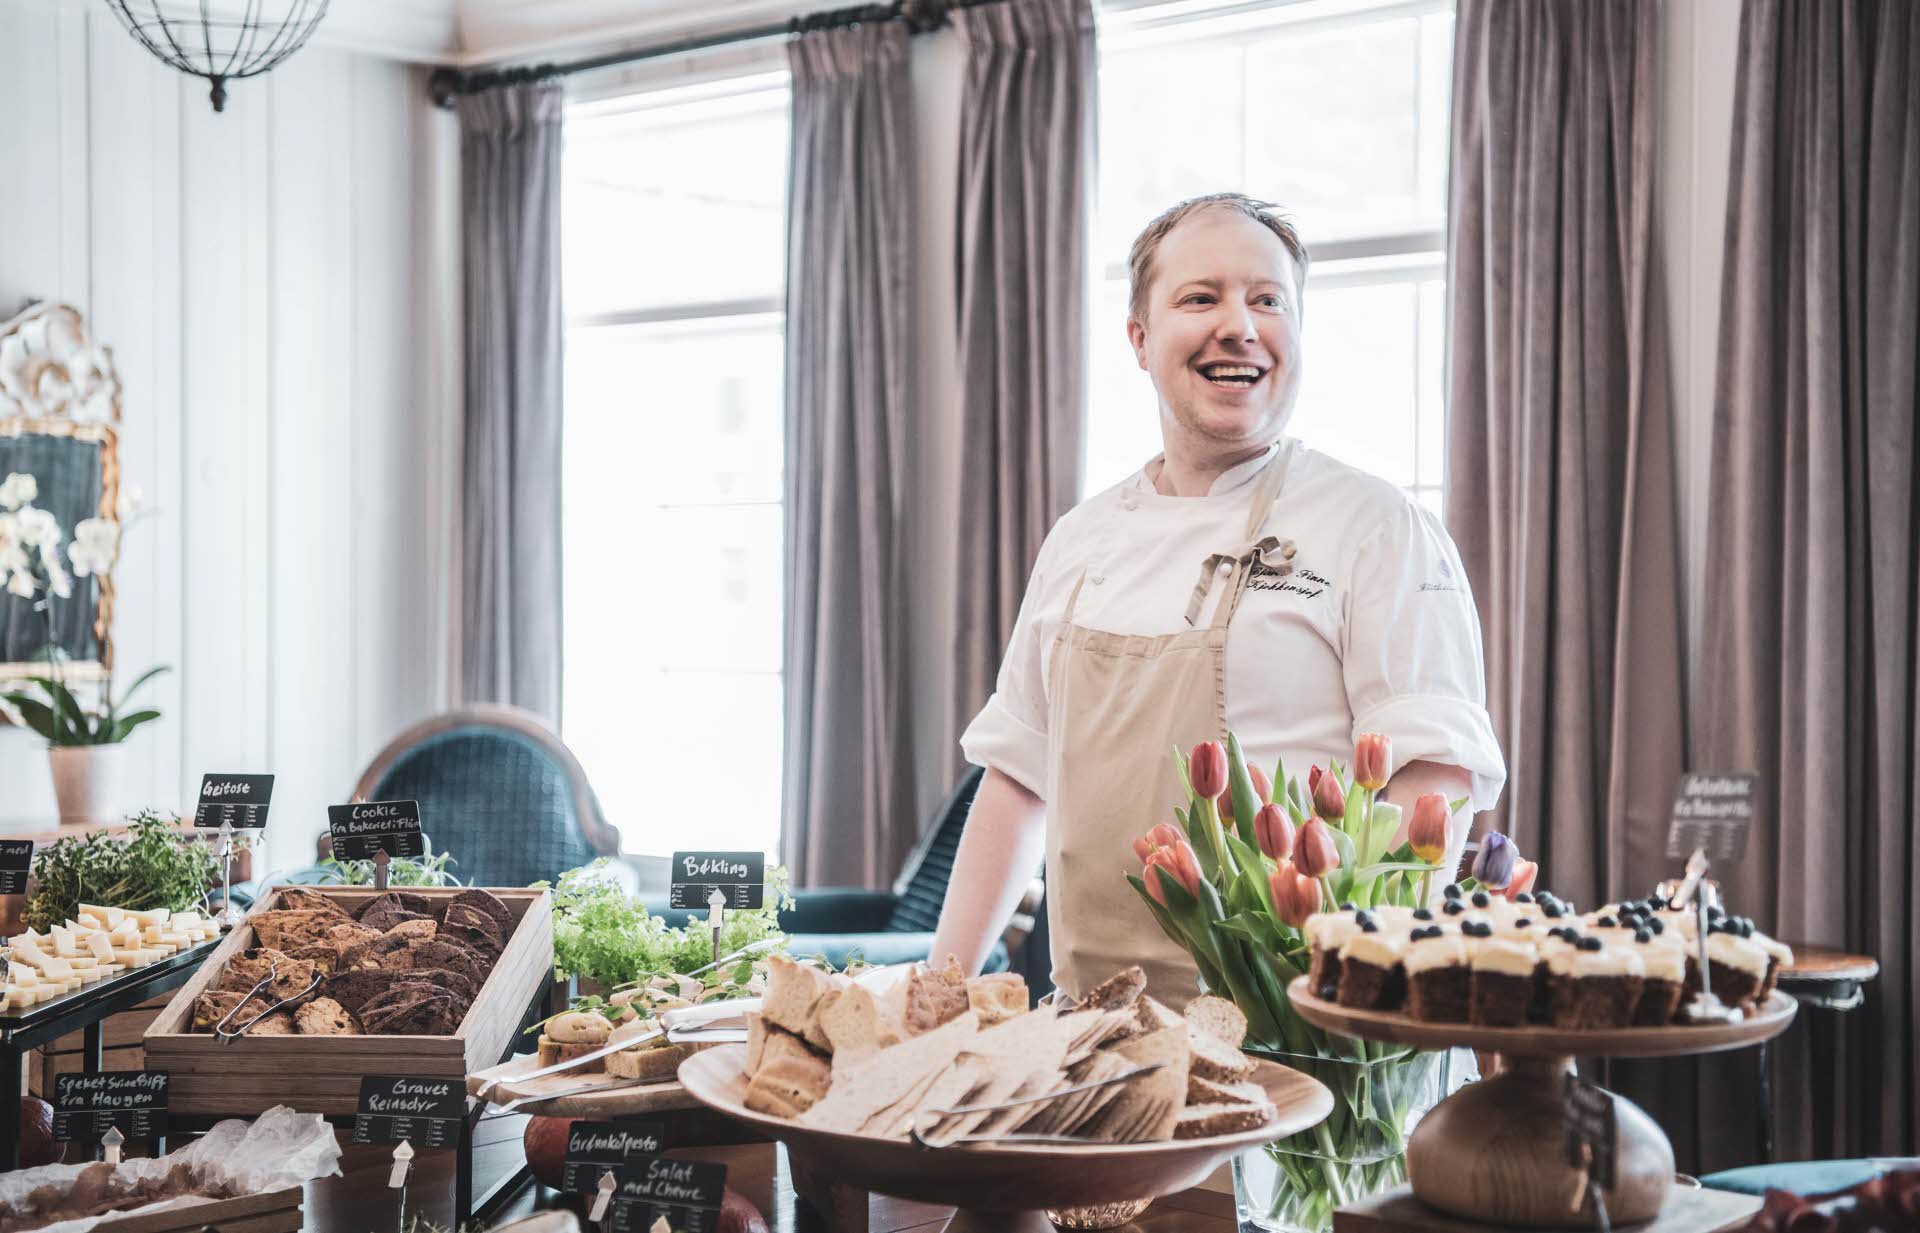 A chef behind a buffet of small dishes incl. cake, flatbread and cheese.